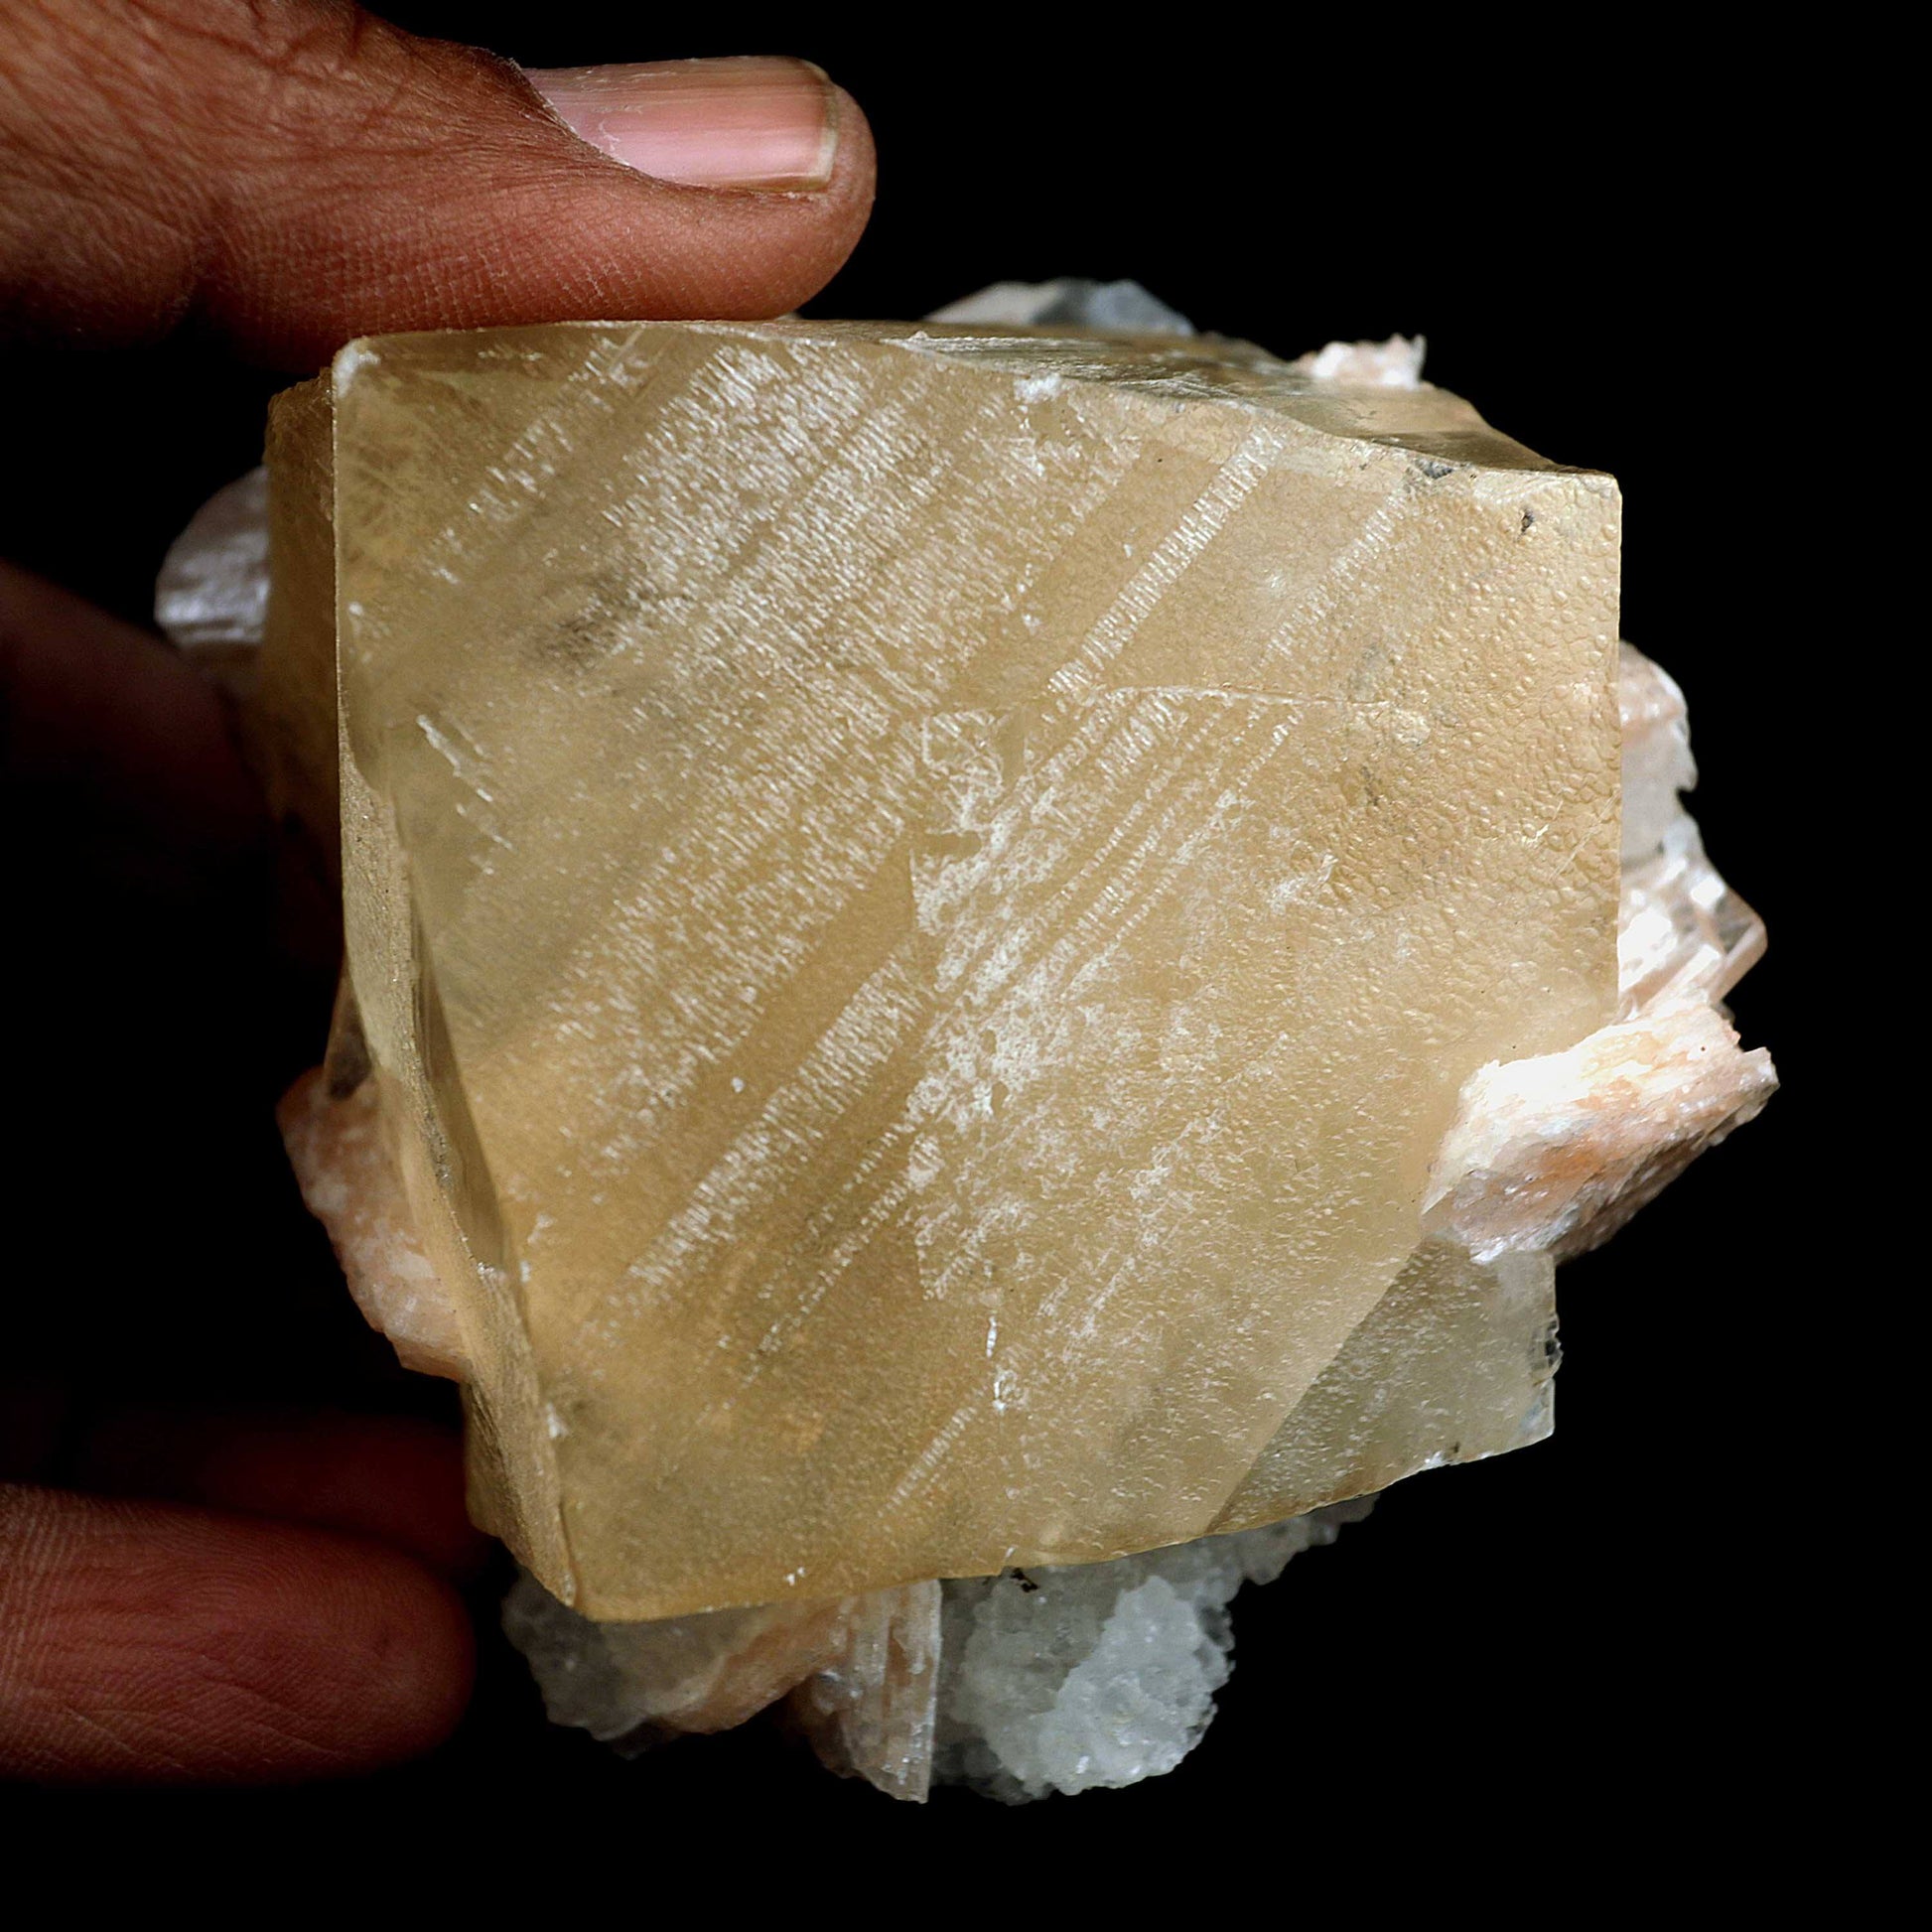 Calcite Cube with Stilbite, MM Quartz Natural Mineral Specimen # B 403…  https://www.superbminerals.us/products/calcite-cube-with-stilbite-mm-quartz-natural-mineral-specimen-b-4030  Features:A dazzling and wonderful gemmy Calcite cubic precious crystal from the Nashik locale in Maharashtra, India. The precious stone is a twisted rhombohedron, tending to practically cubic and measures cubic gems, one arising out of the top face and one further down. The gems are straightforward, absolutely gemmy